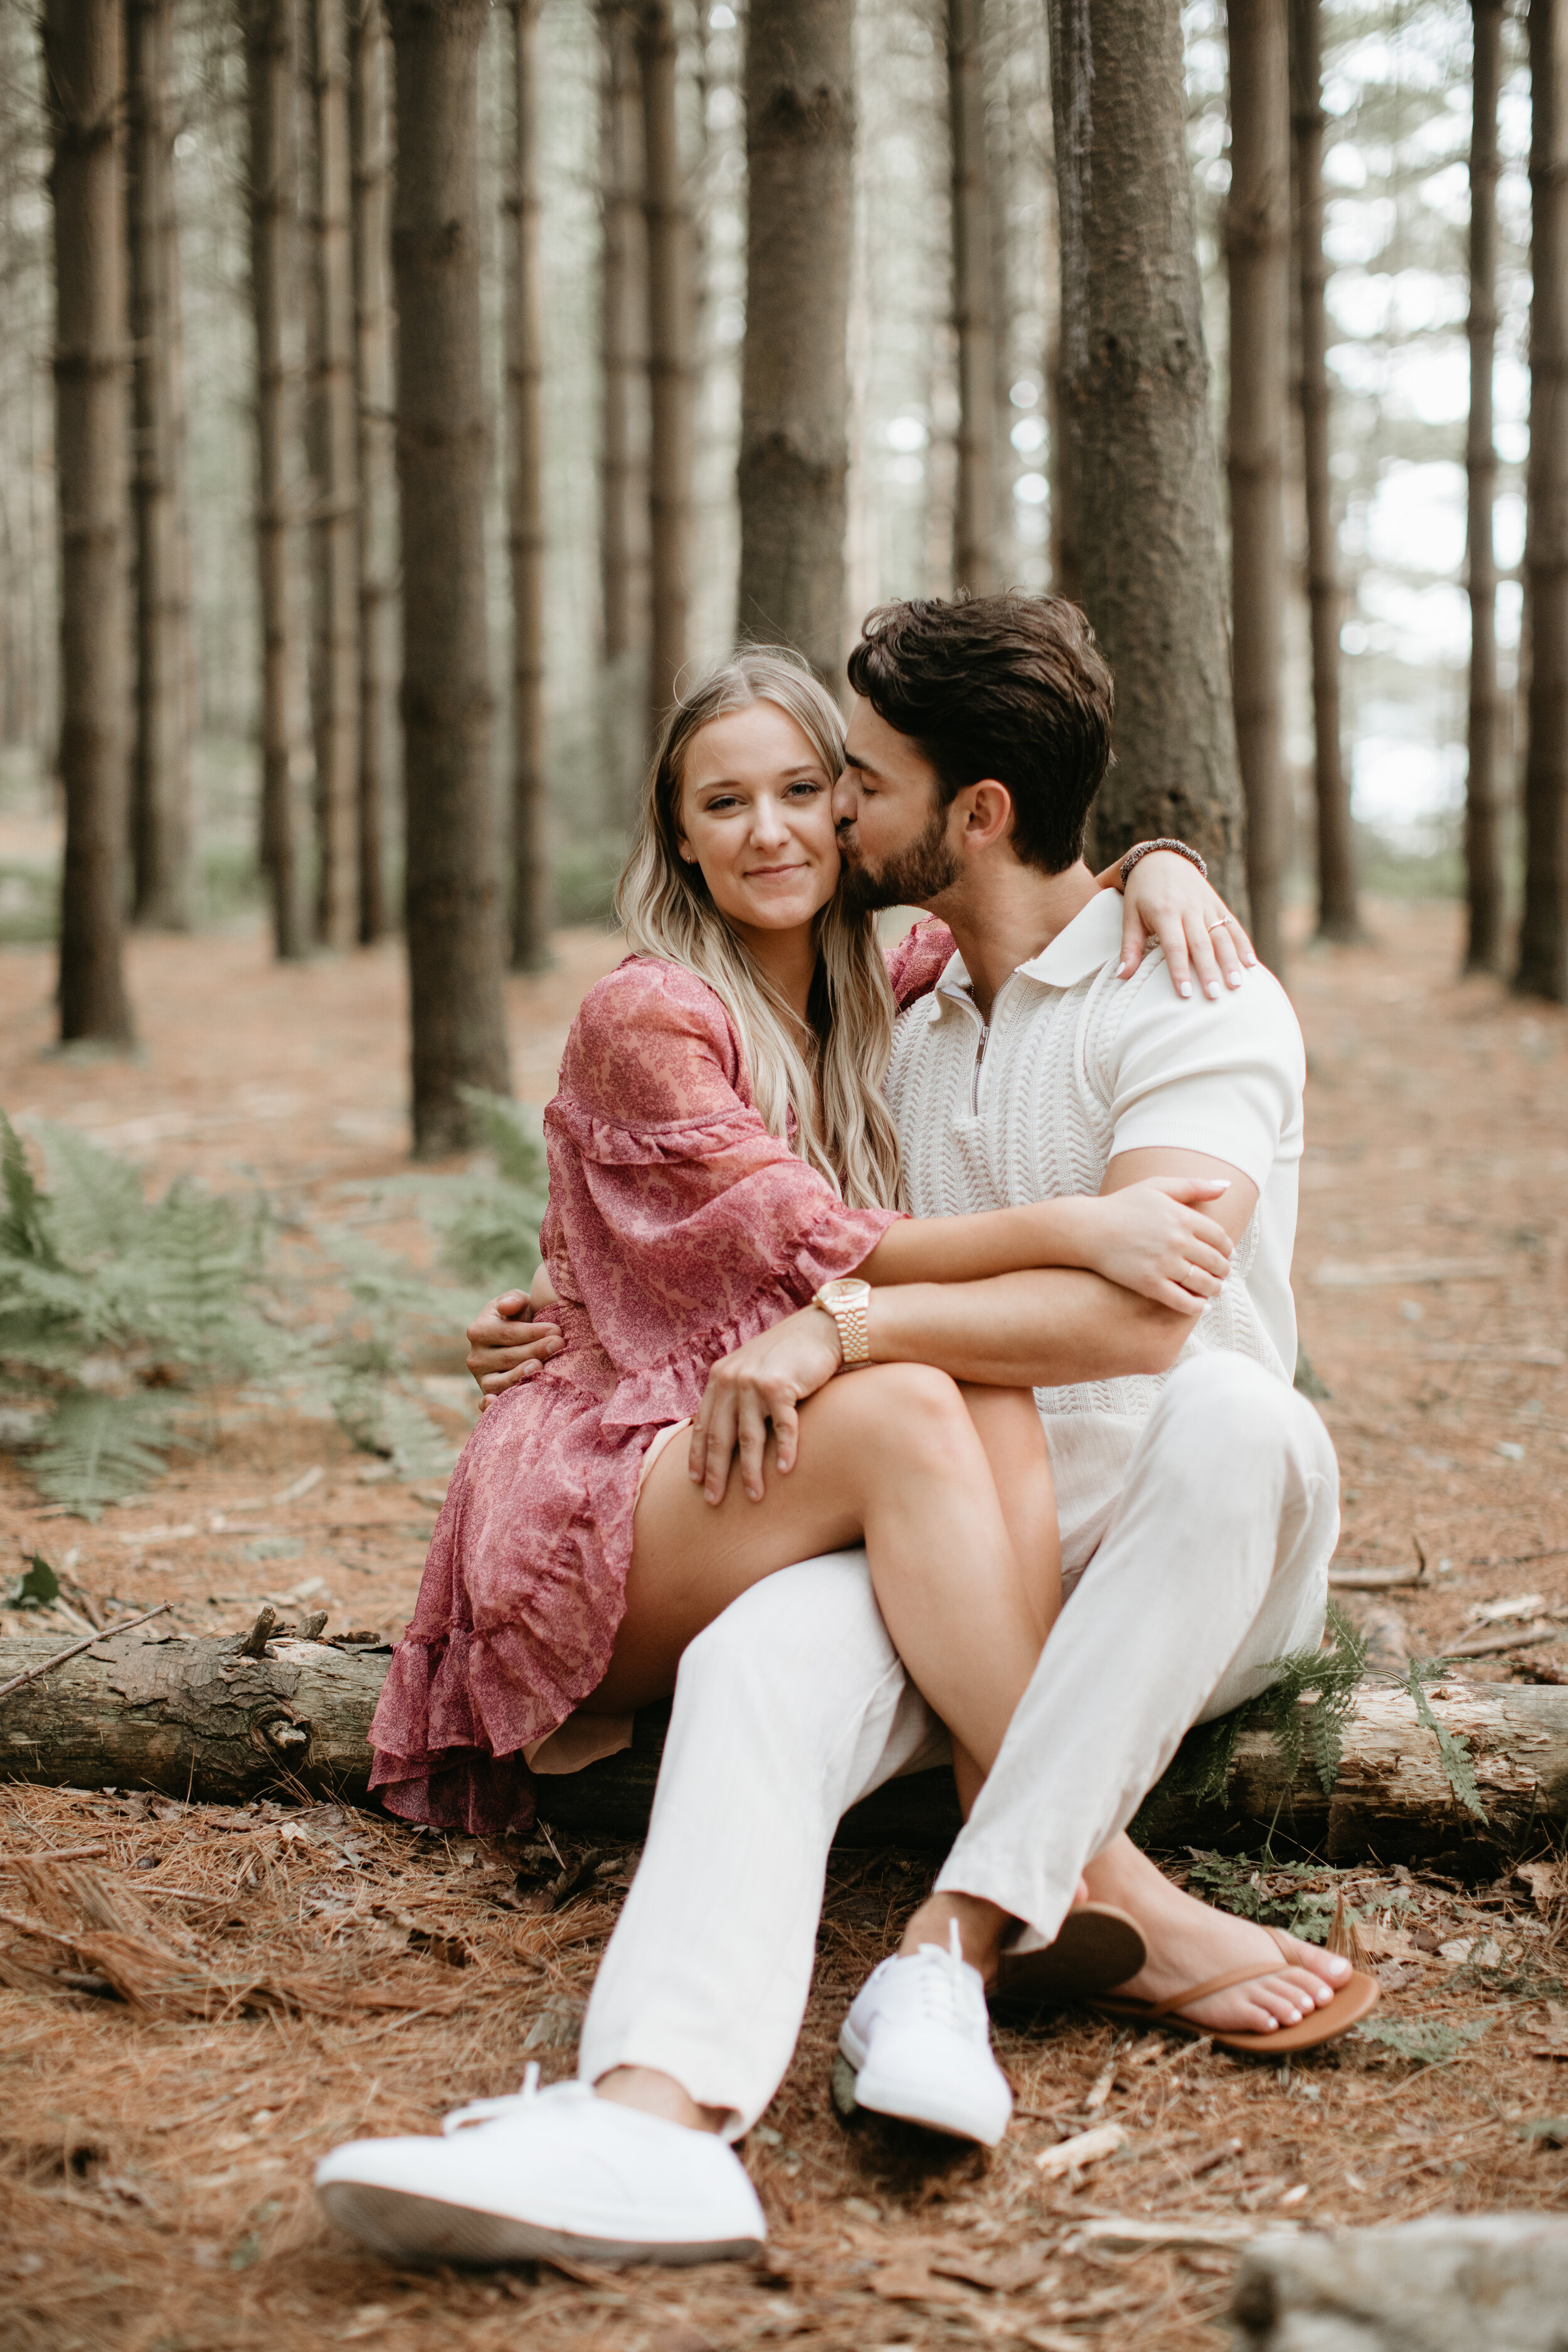 Nicole-Daacke-Photography-michaux-state-forest-elopement-adventure-engagement-session-pennsylvania-elopement-pa-elopement-photographer-gettysburg-photographer-state-park-elopement-engagement-session-pennsylvania-waterfall-110.jpg